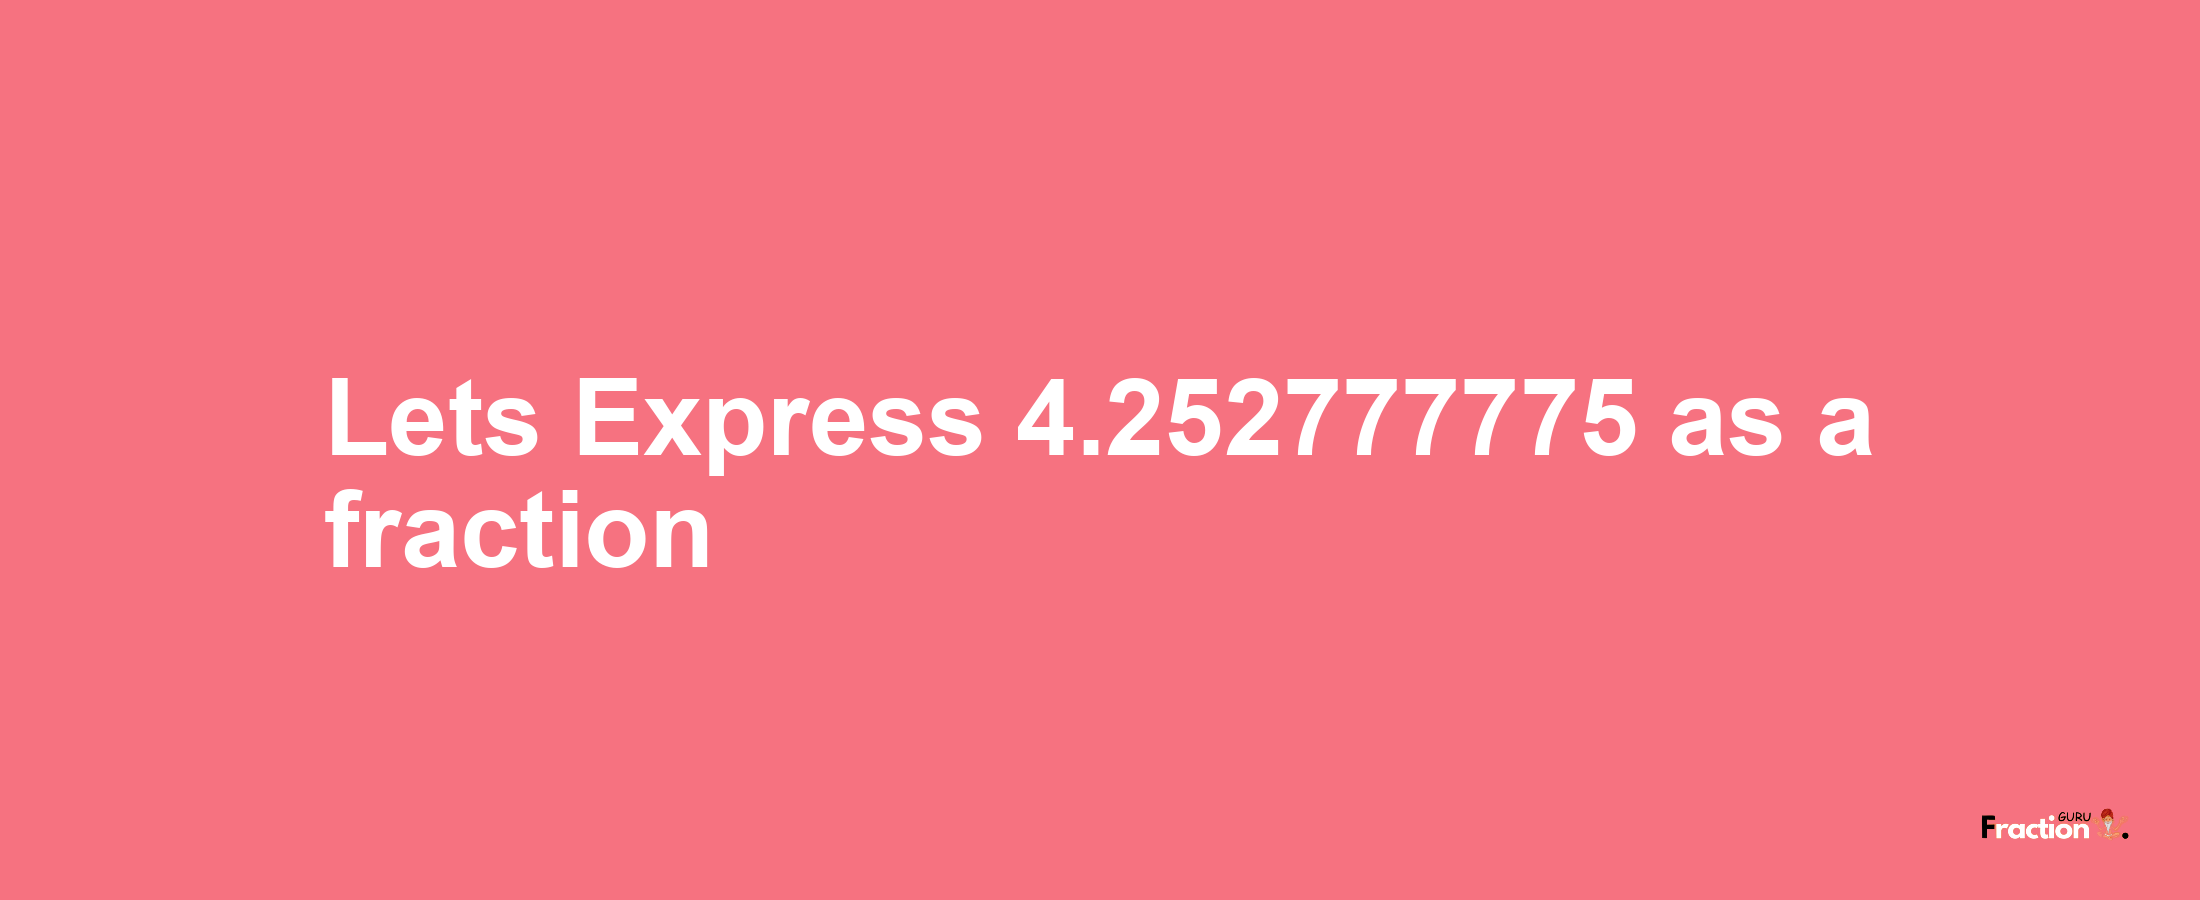 Lets Express 4.252777775 as afraction